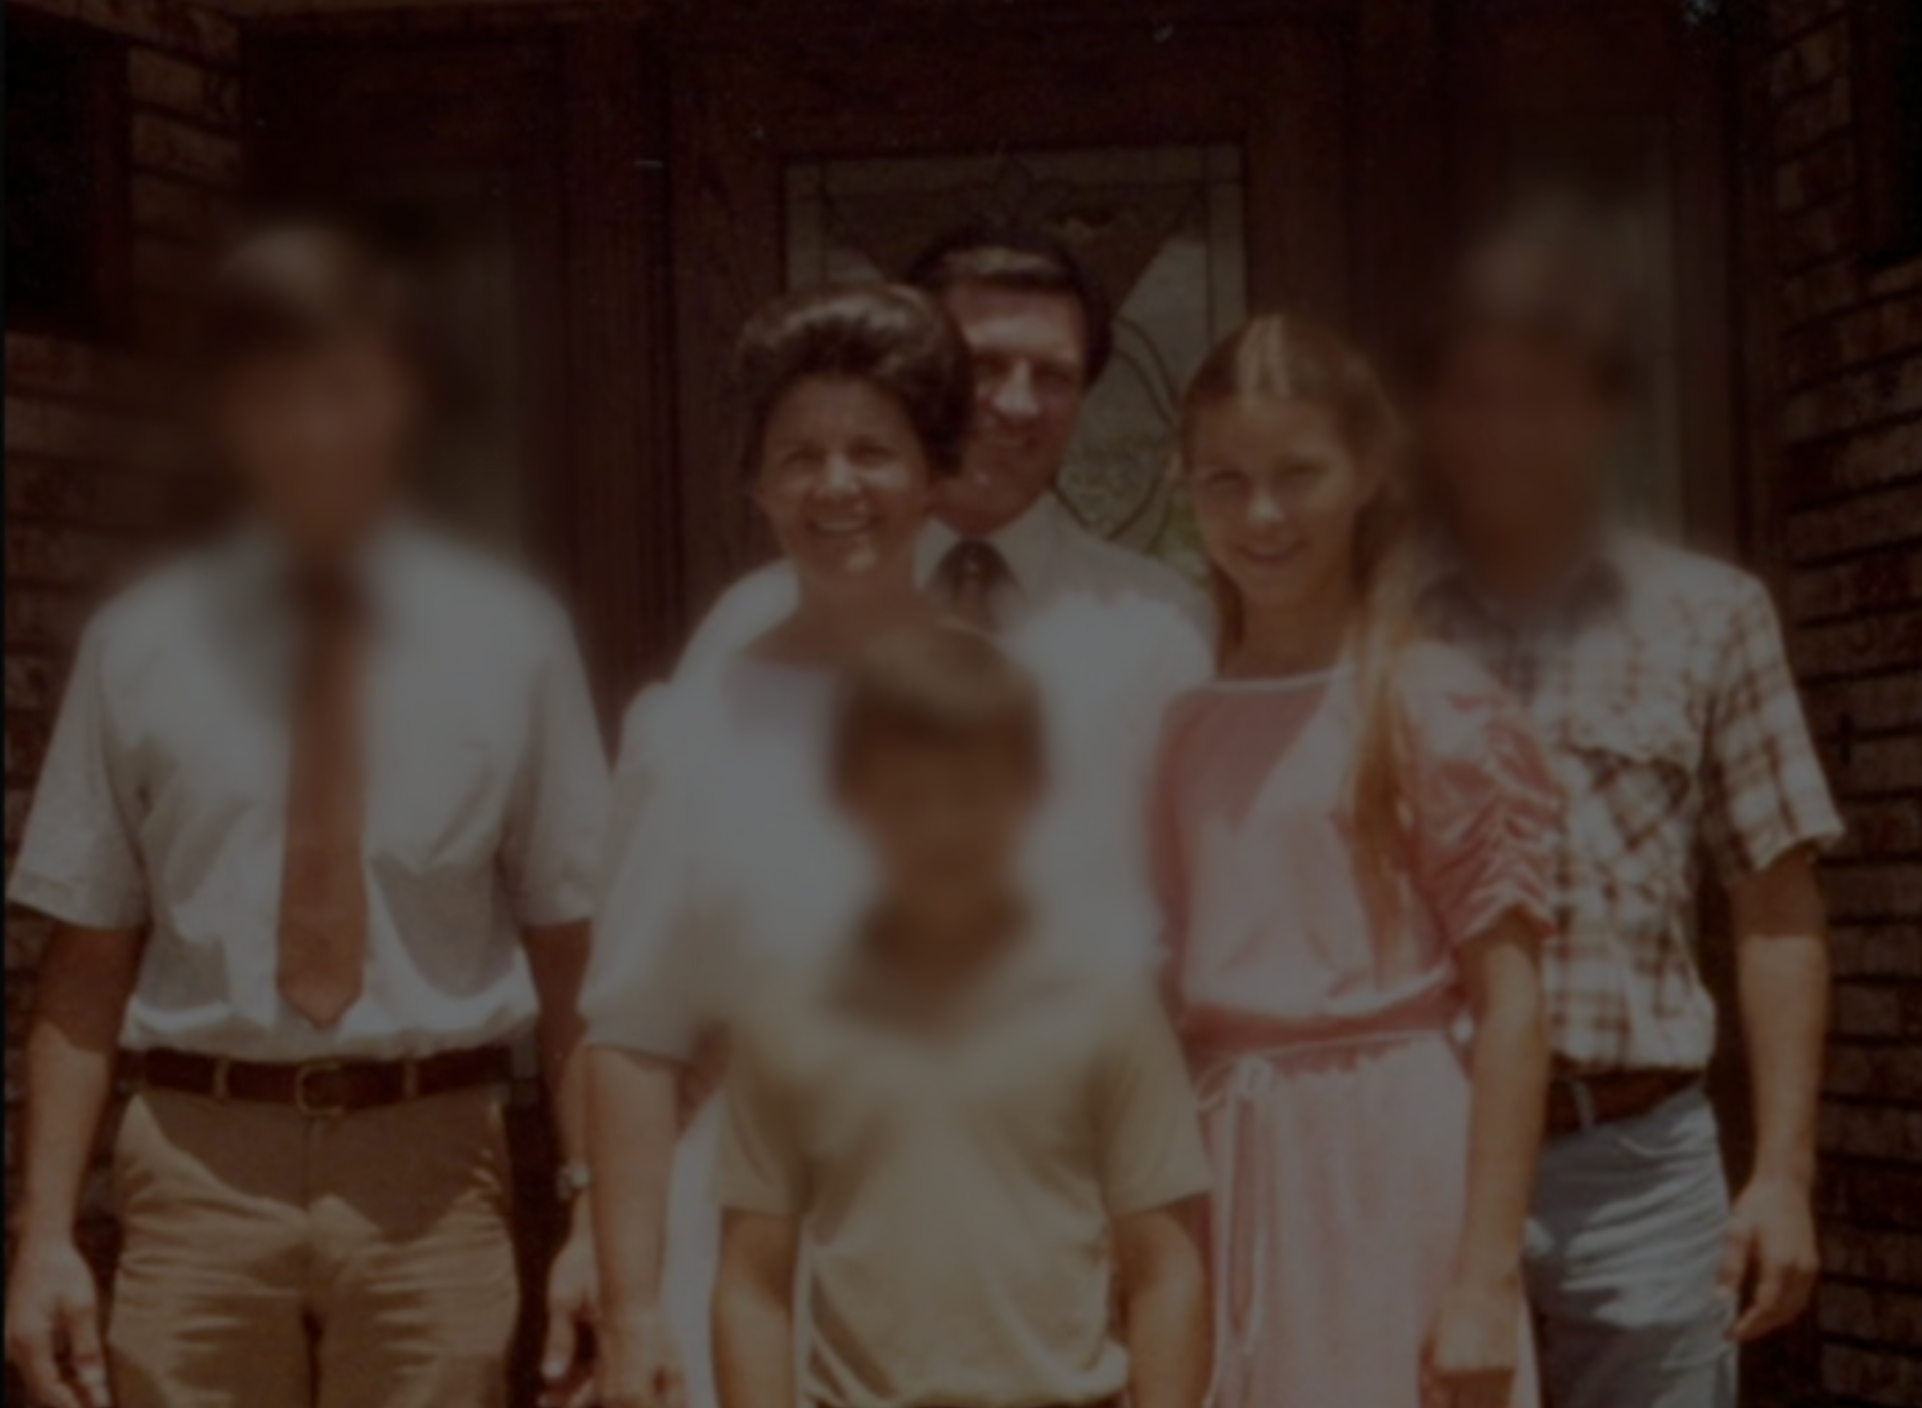 Sheri Autrey and her family, who were part of the 2x2 religious sect